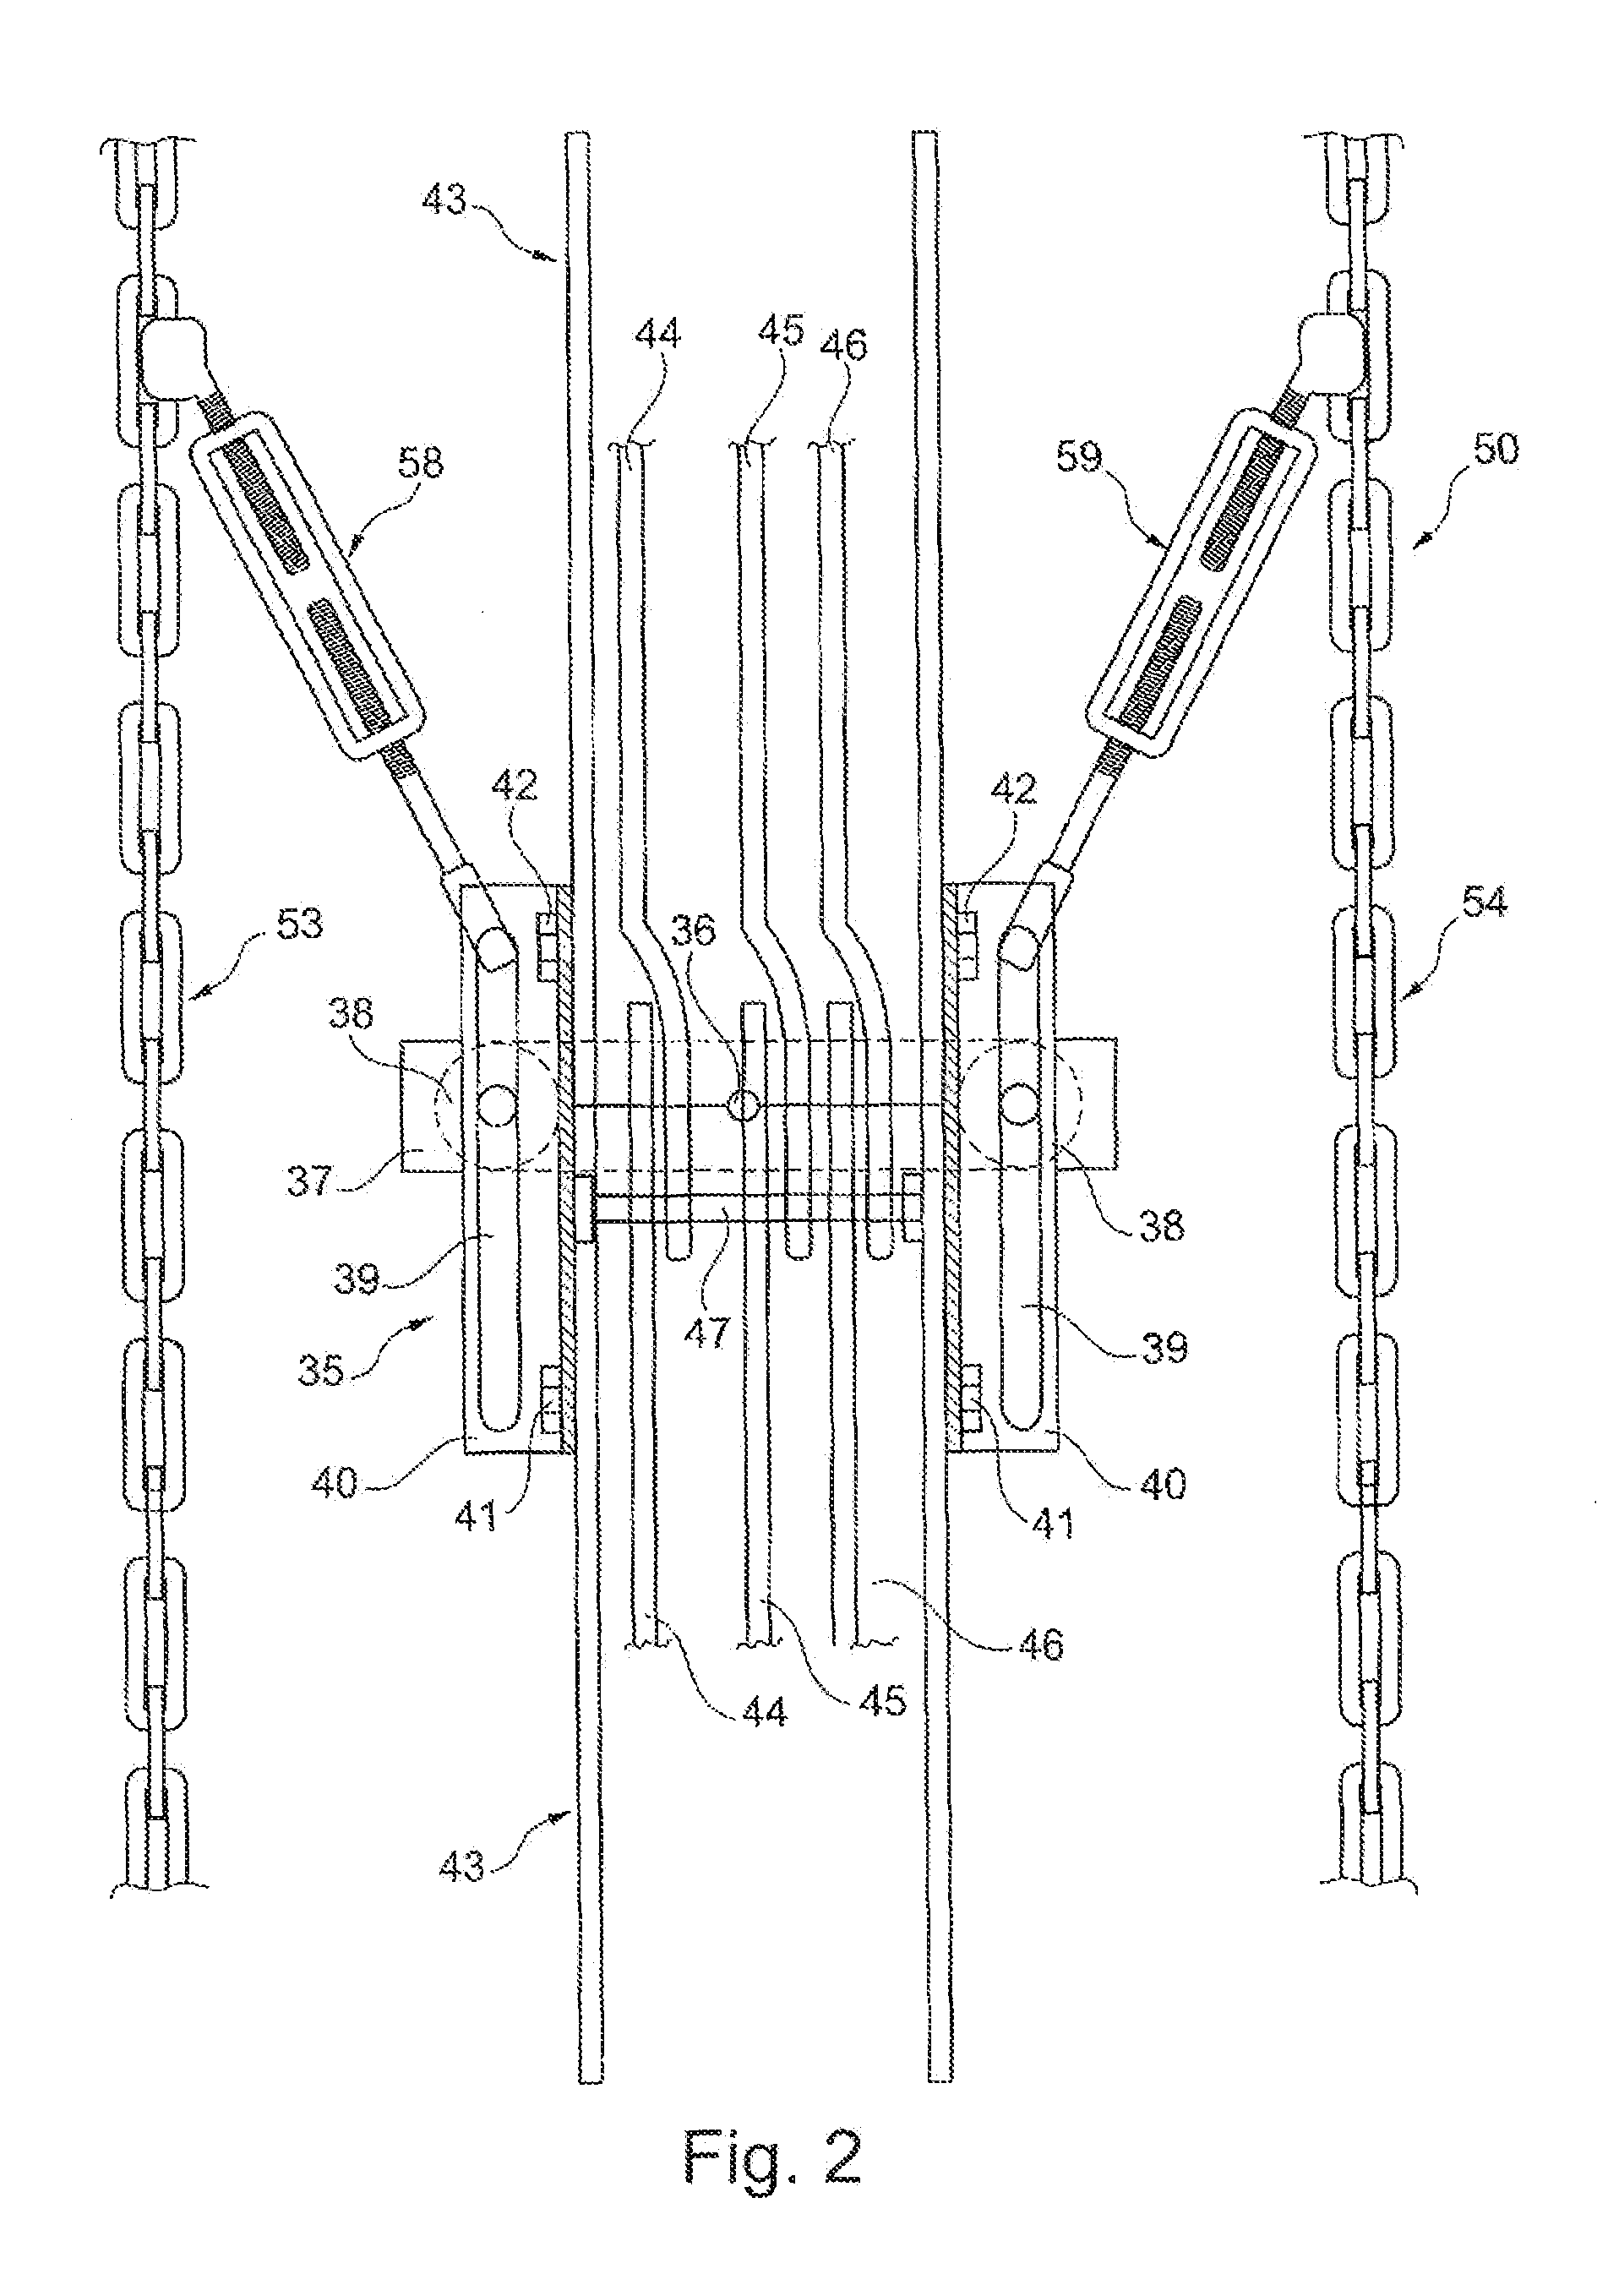 Method and device for handling, in particular for repairing or replacing, busbars on wind power plants